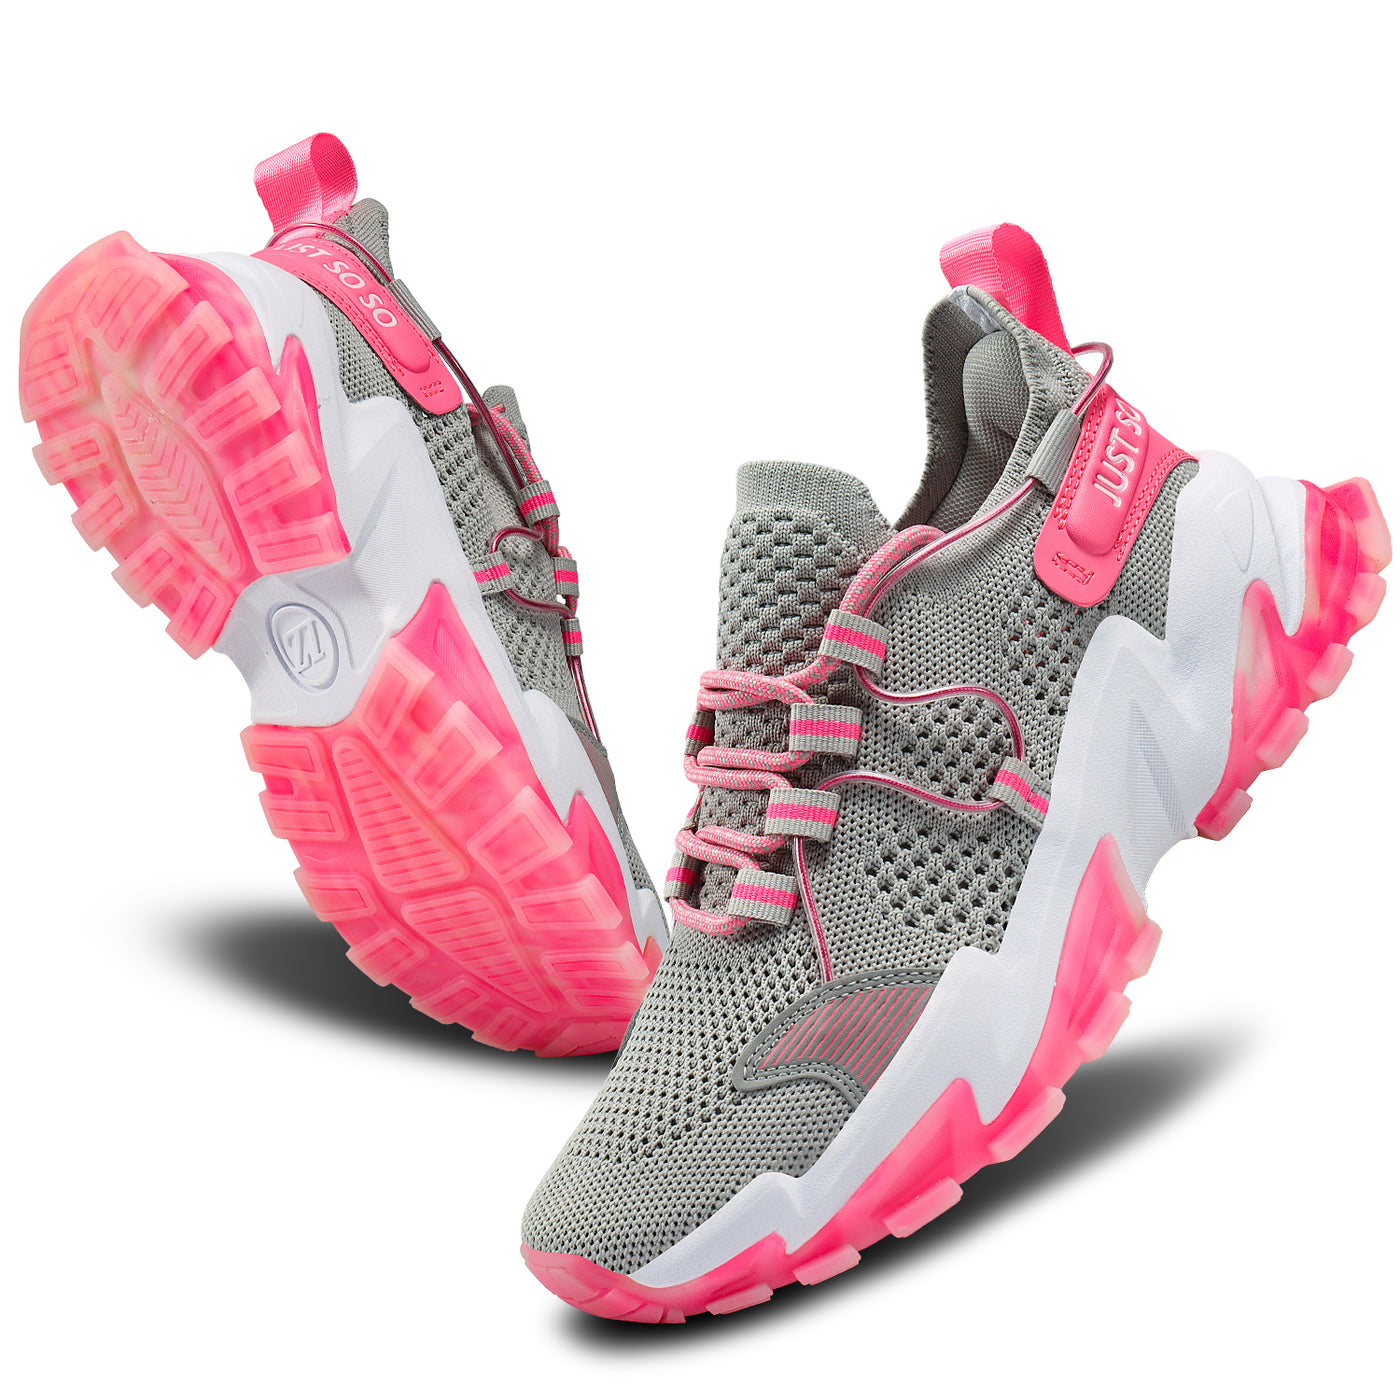 Just So So Women's  Sneakers walking shoes (Second generation upgrade)